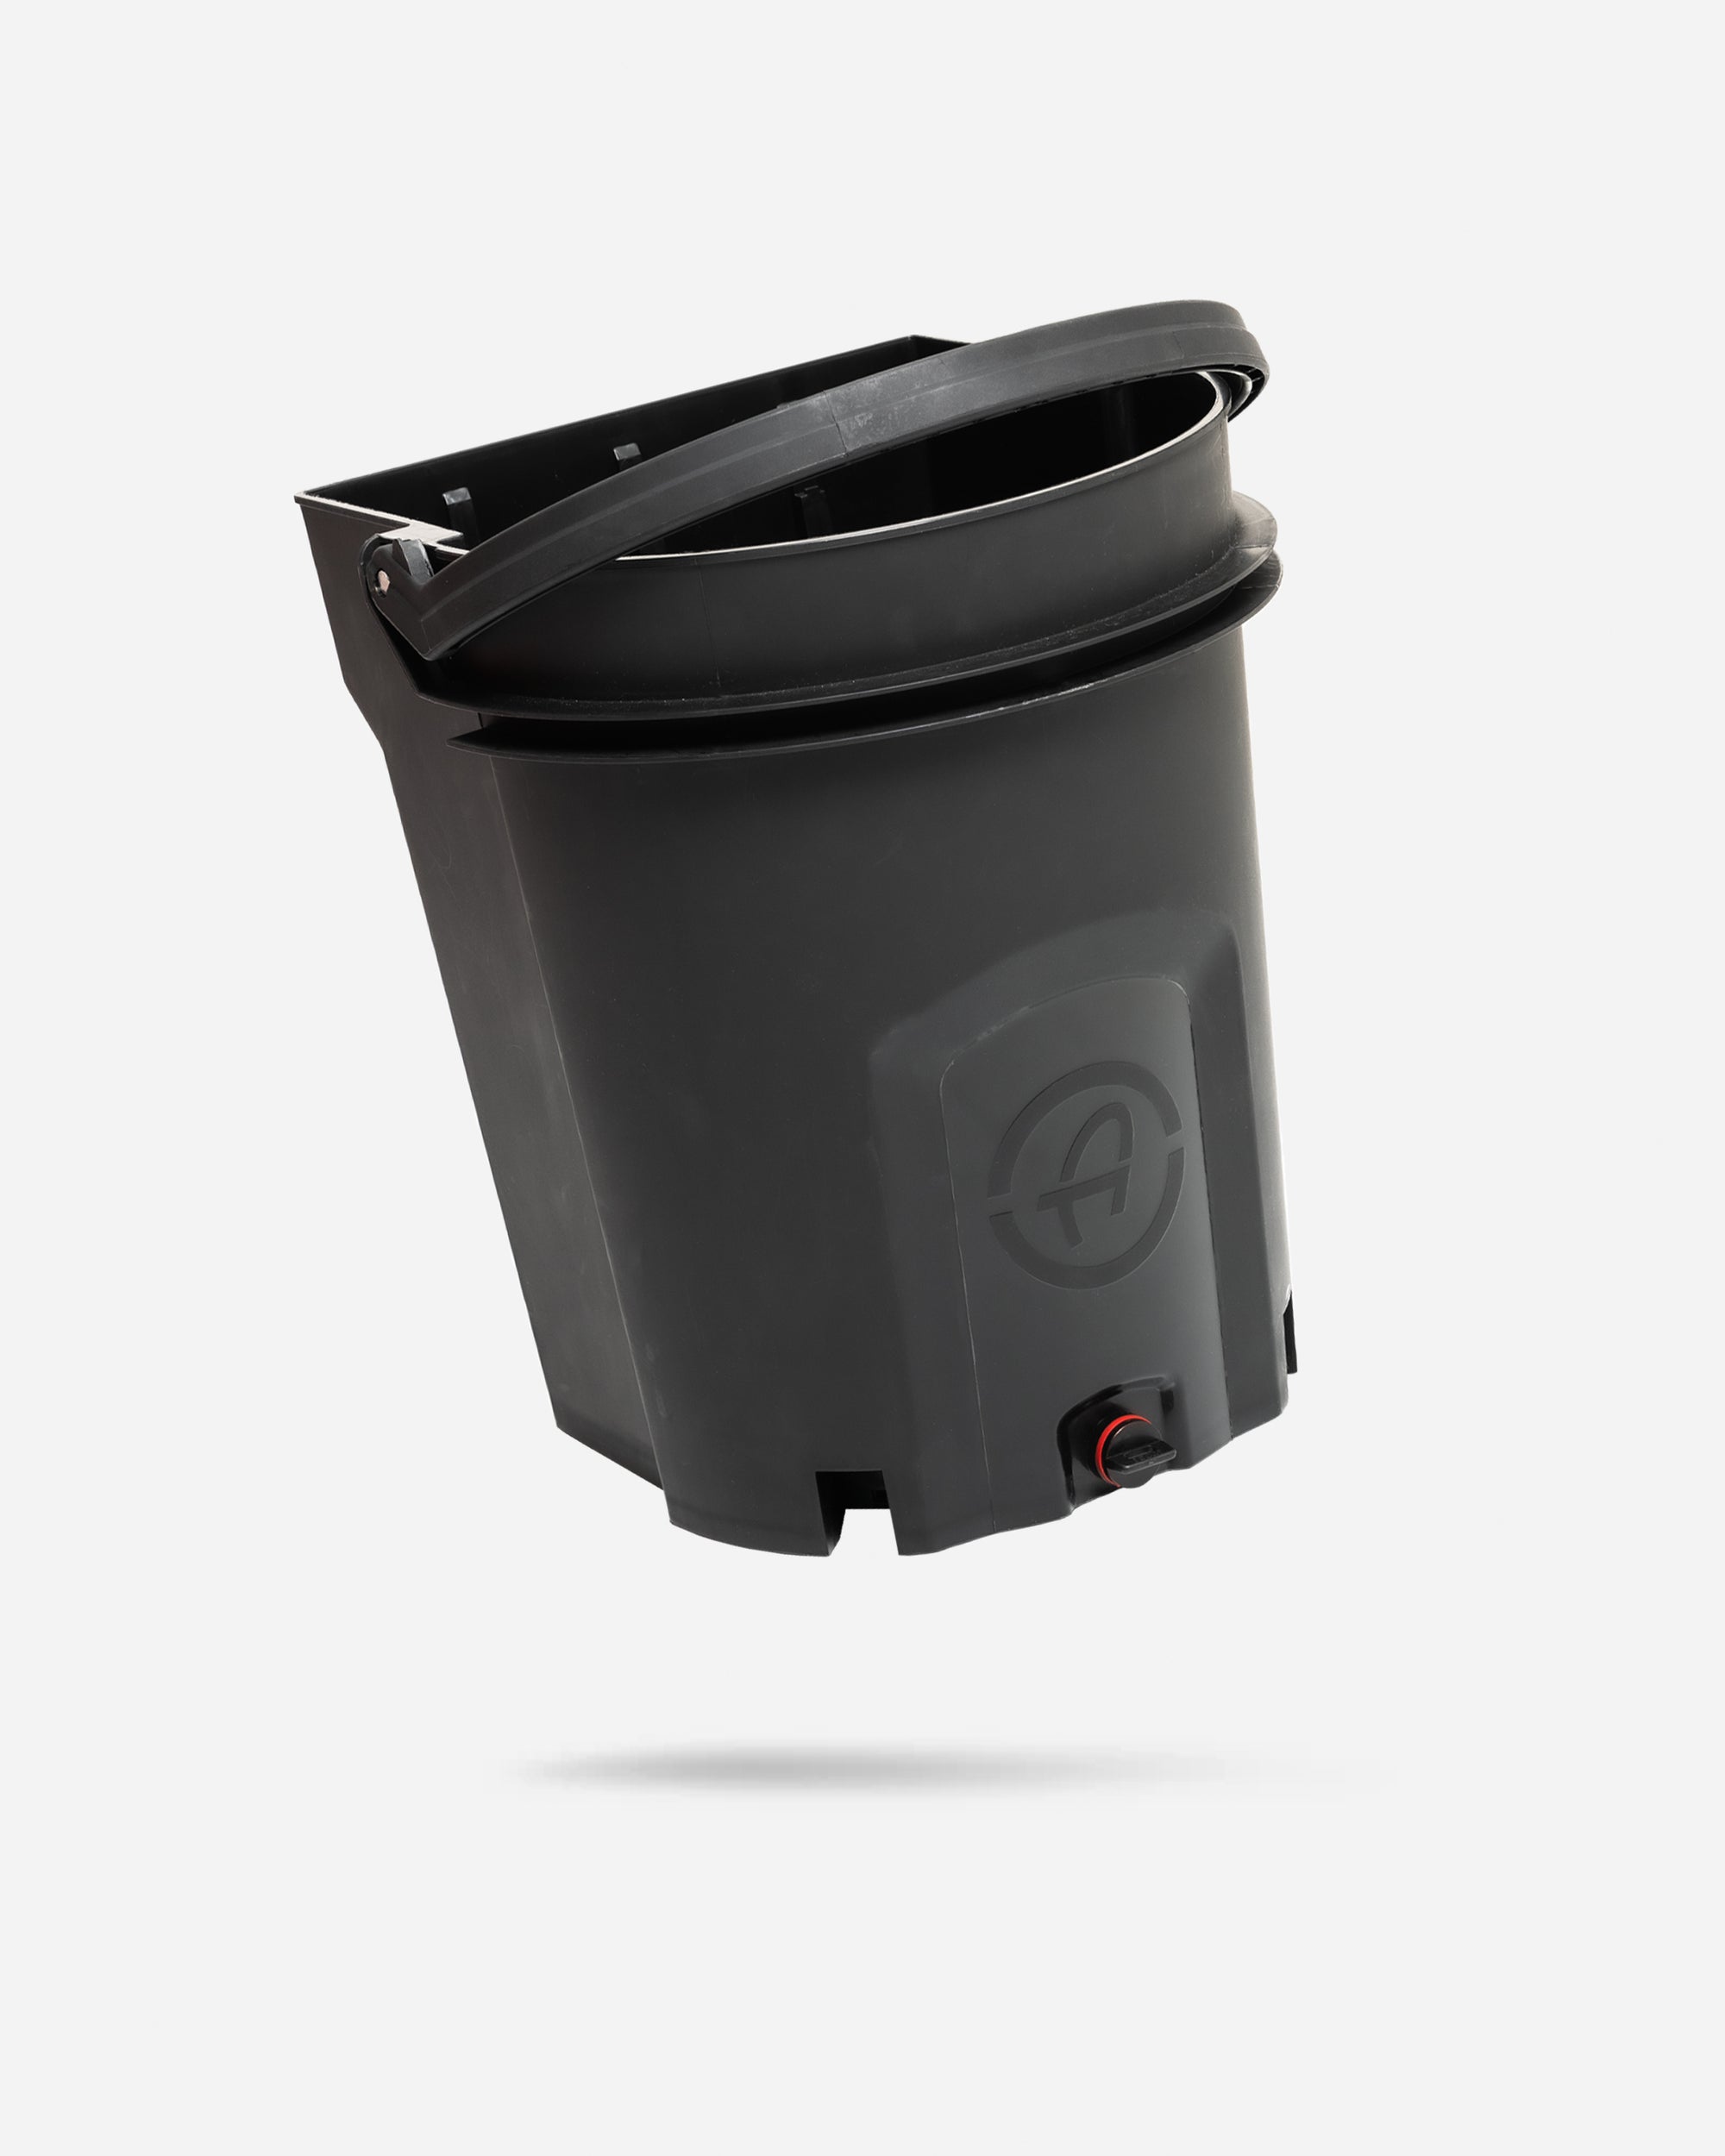 Collapsible Bucket with Lid (5 Gallon)